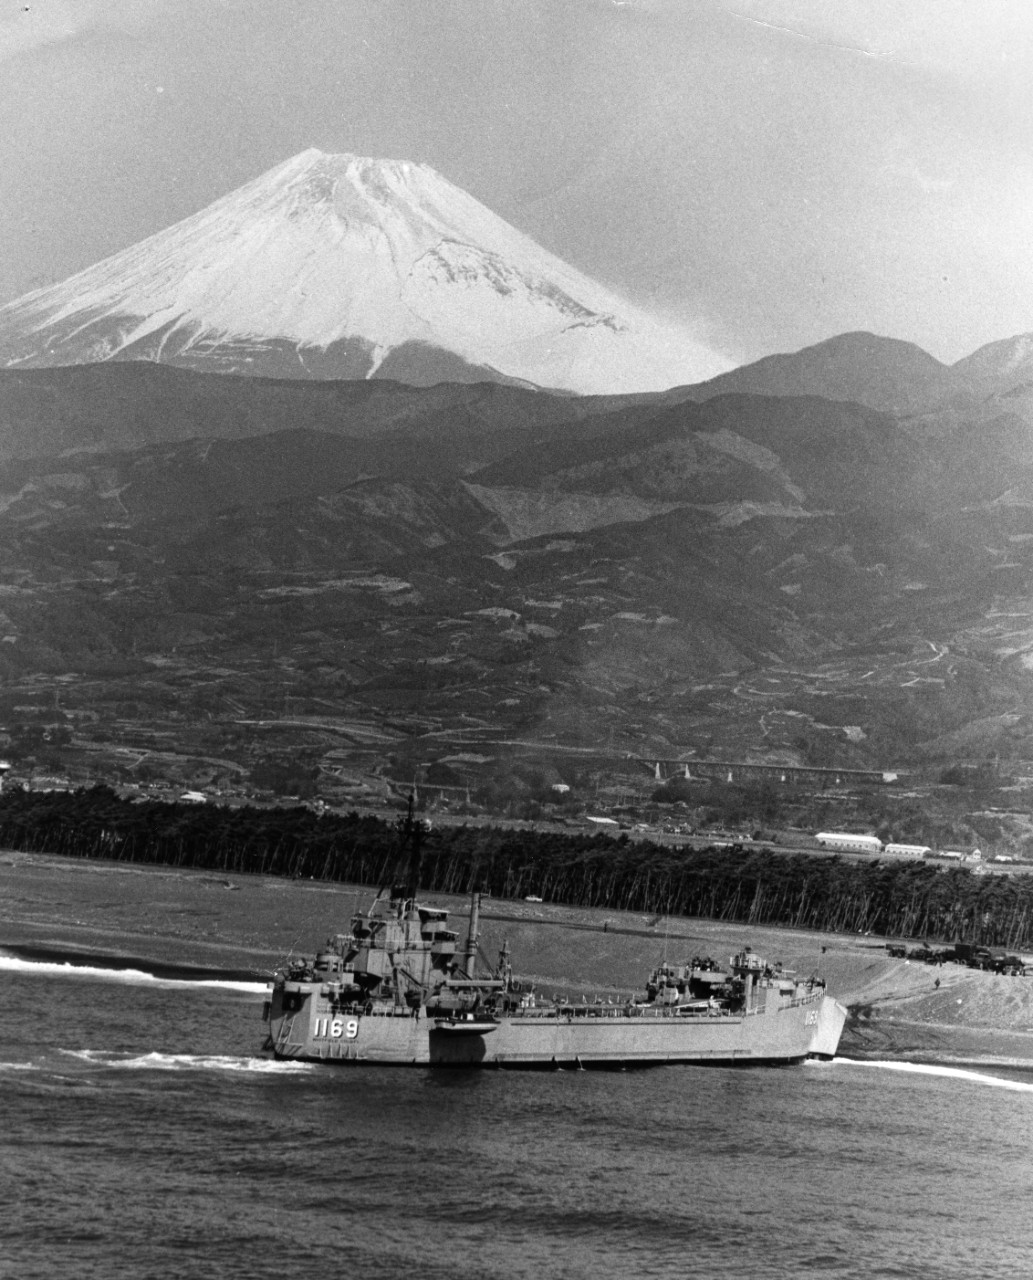 Tank landing ship USS Whitfield County (LST-1169) unloads elements of the Third Marine Division on the beach at Numazu, Japan. Snow-covered Mt. Fuji looms in the background.